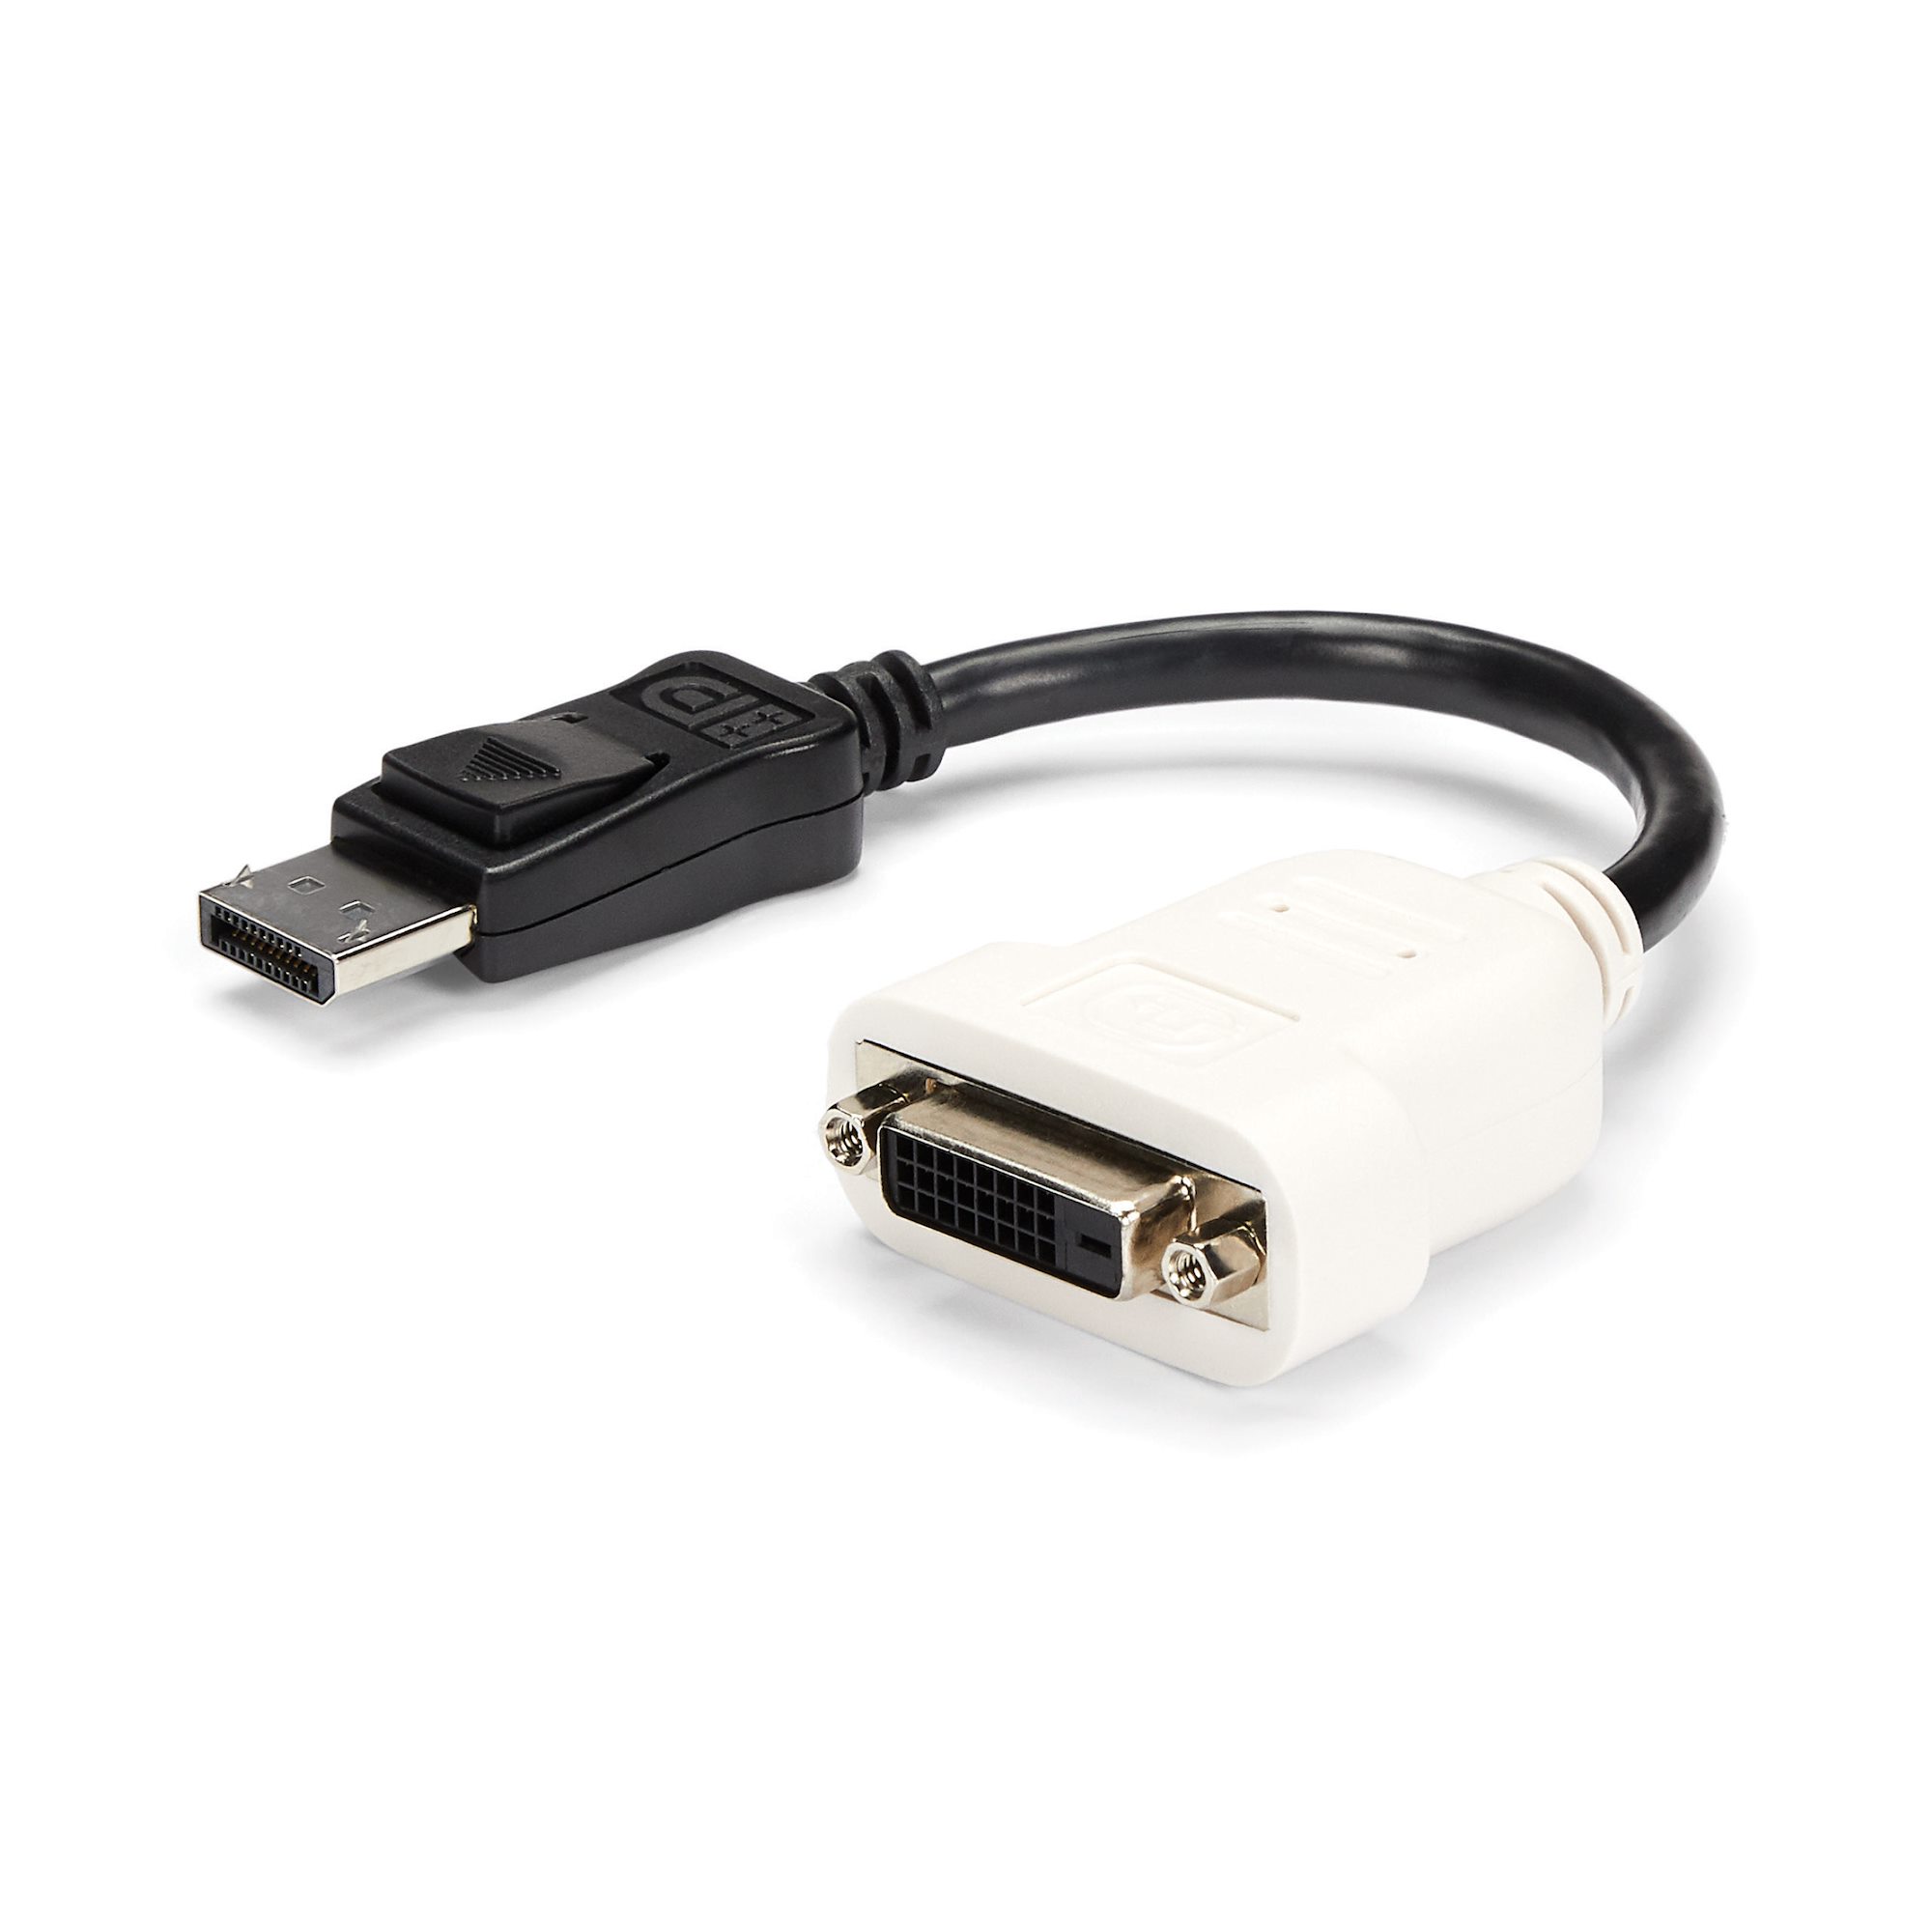 DisplayPort to HDMI Adapter - DP 1.2 to HDMI Video Converter 1080p - DP to  HDMI Monitor/TV/Display Cable Adapter Dongle - Passive DP to HDMI Adapter 